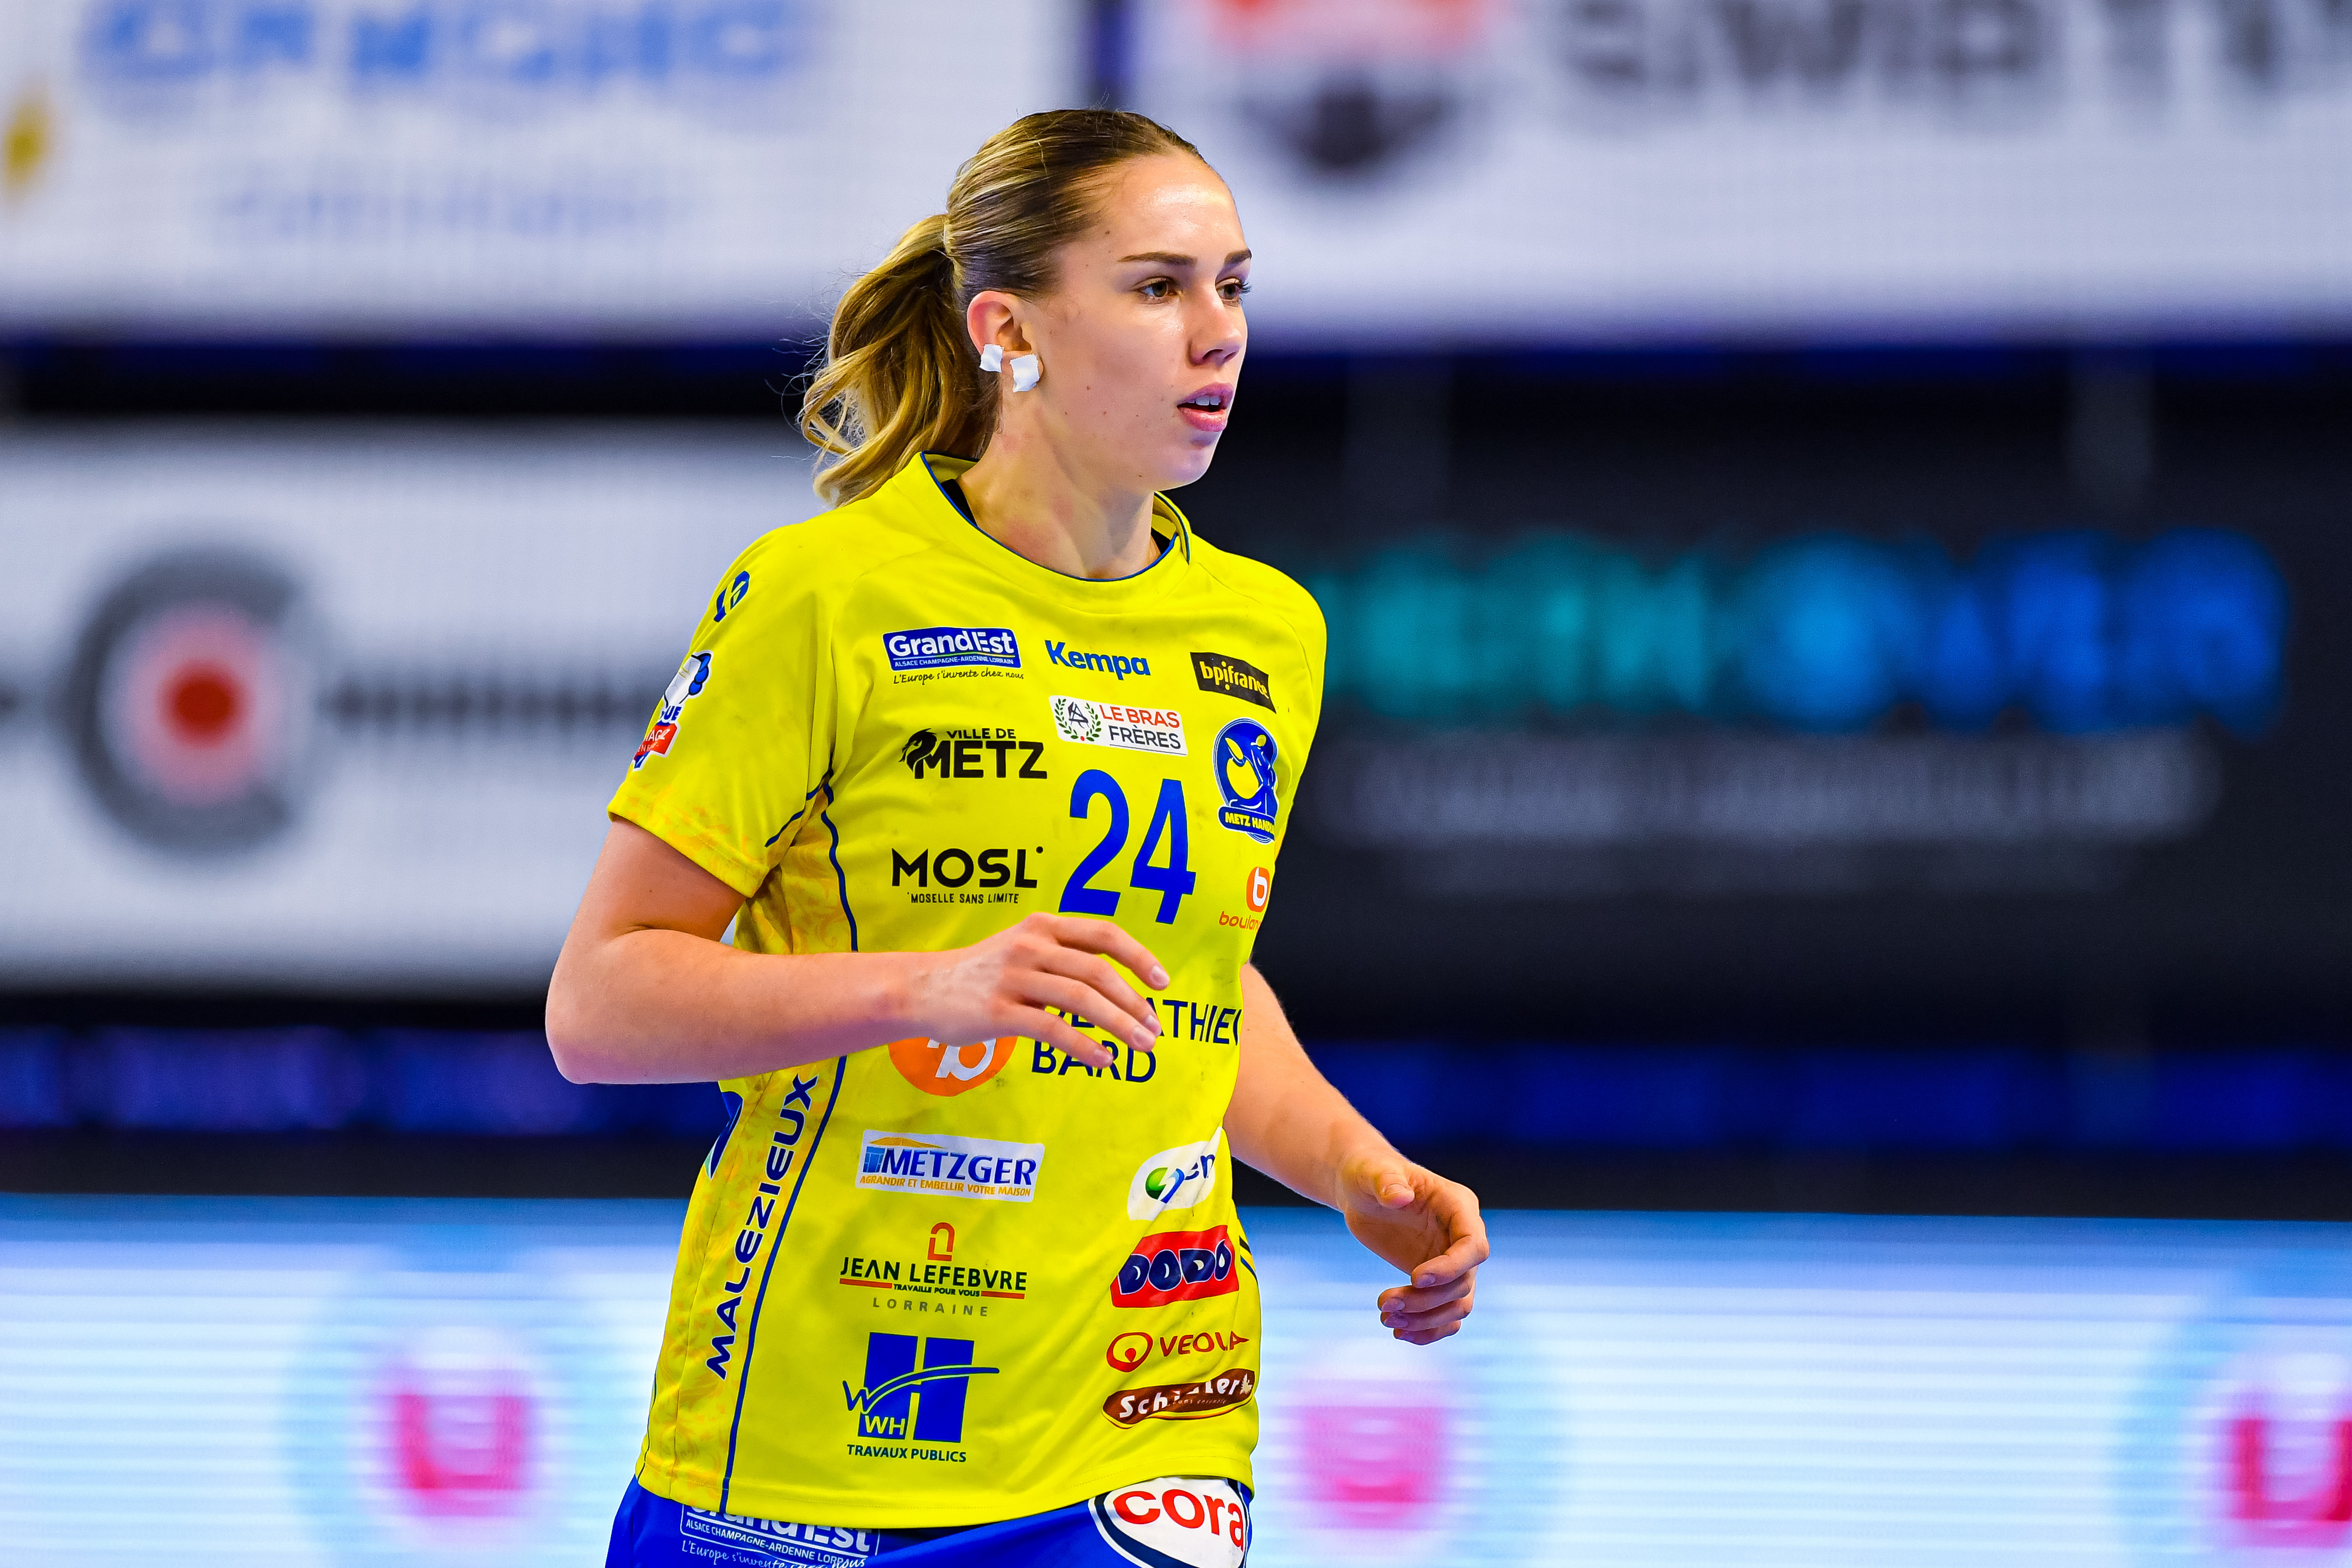 Emma JACQUES of Metz during the French Ligue Butagaz Energie women’s handball match between Besancon and Metz on February 2, 2022 in Besancon, France. (Photo by Baptiste Fernandez/Icon Sport)